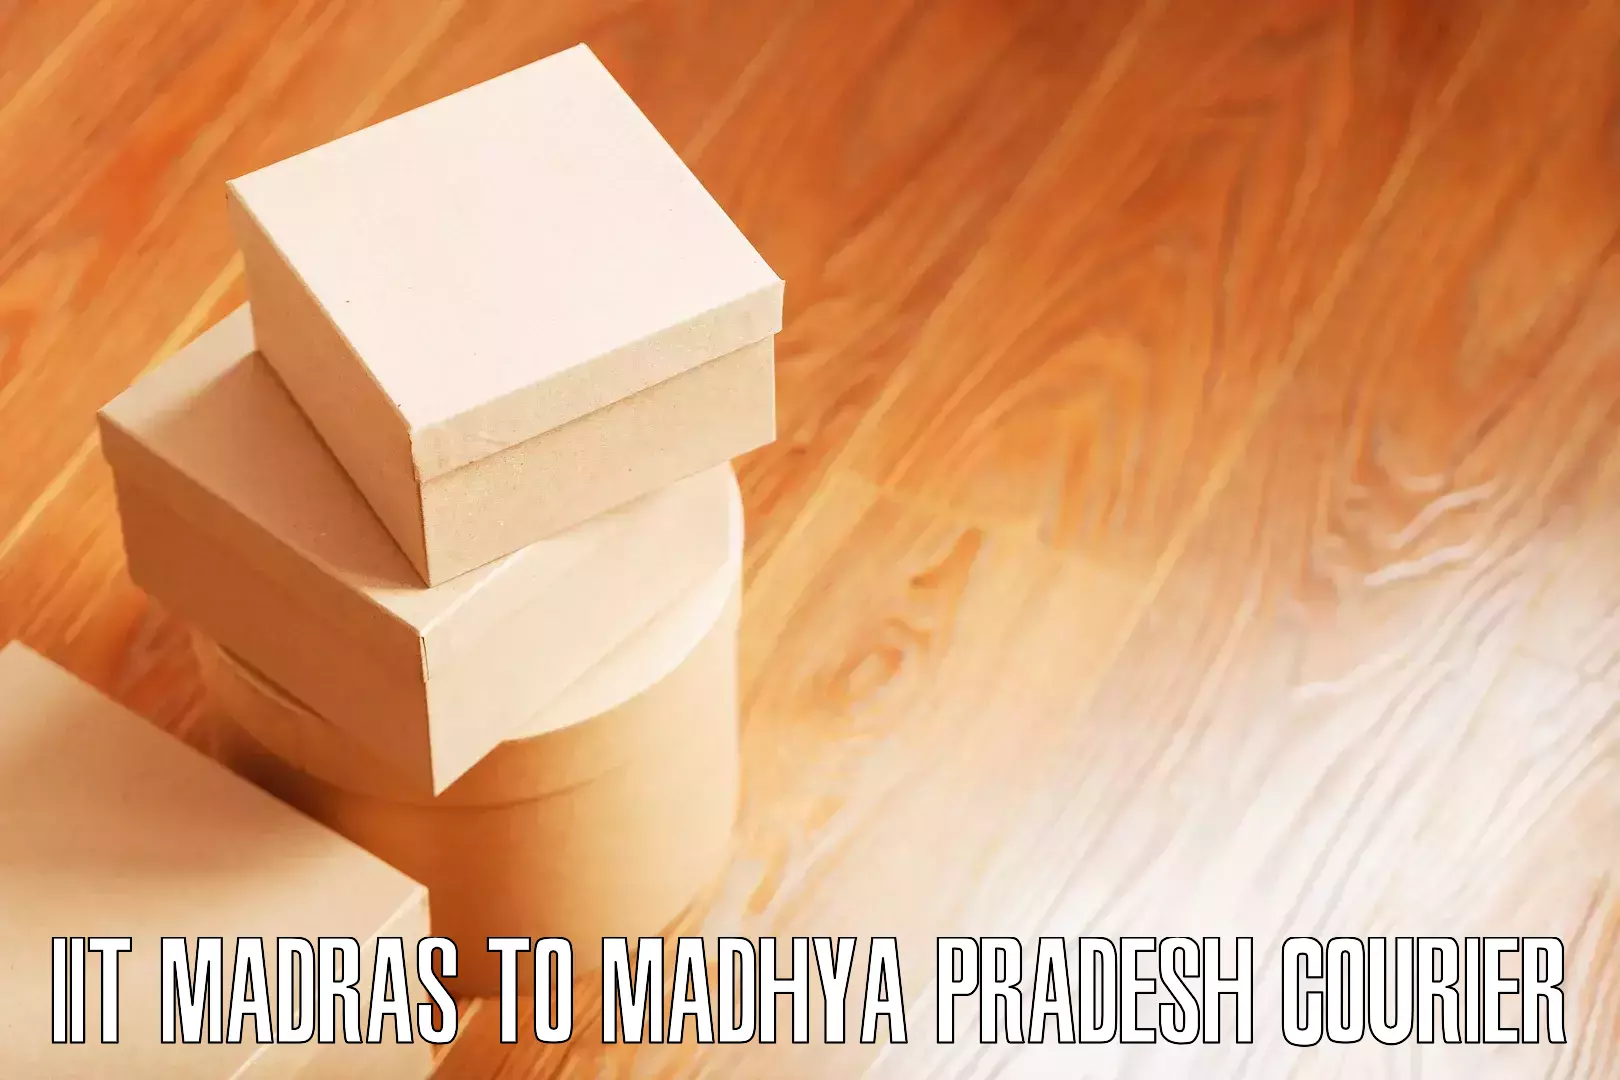 Budget-friendly movers IIT Madras to Nainpur